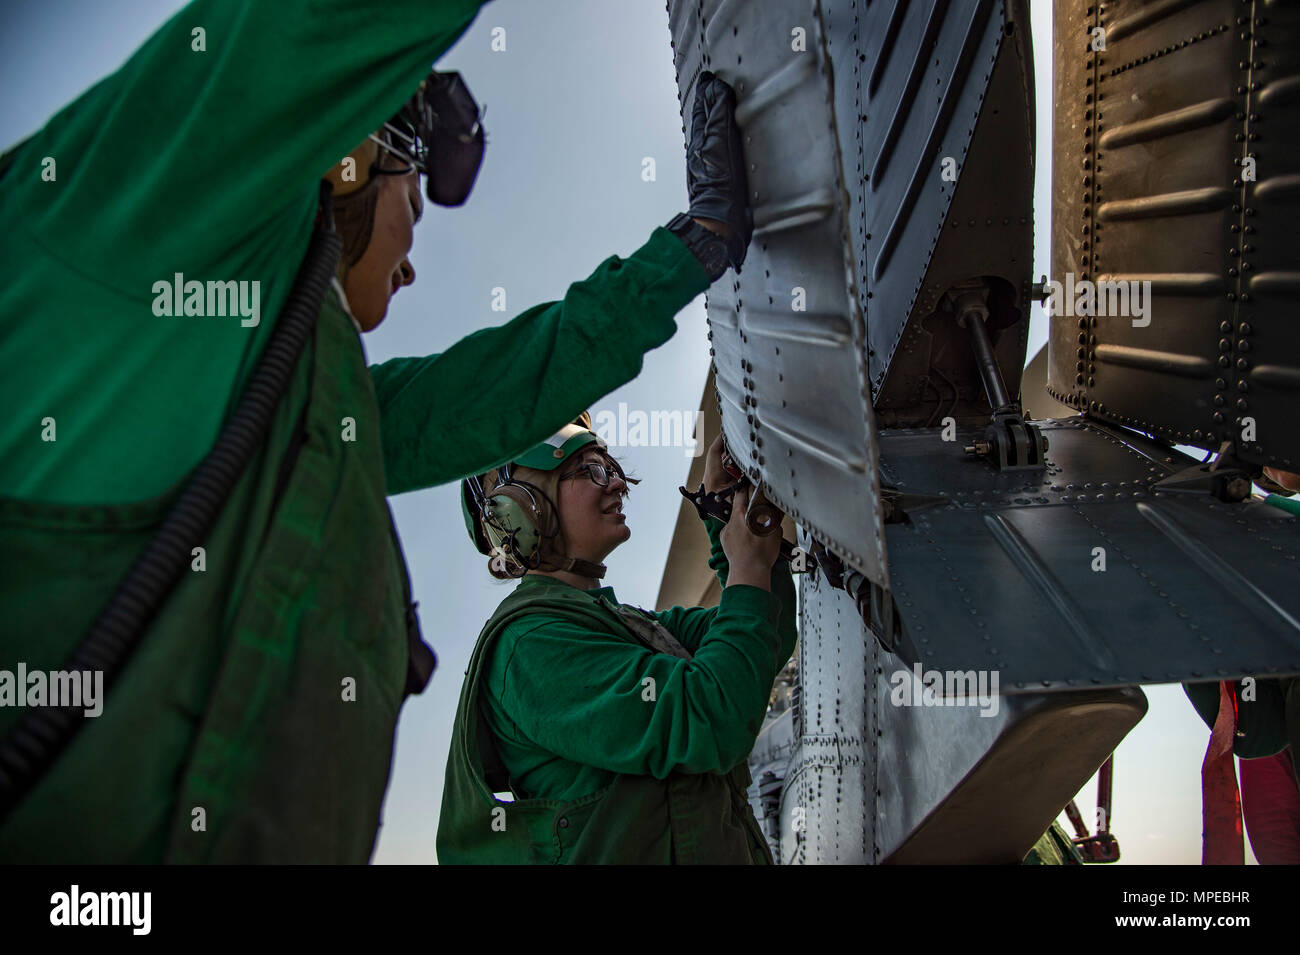 170209-N-OS569-061  ATLANTIC OCEAN (Feb. 9, 2017) Aviation Electrician’s Mate 3rd Class Dealba Manzanite, right, and Aviation Structural Mechanic Airman Mileika Miki, conduct maintenance on an MH-60S Sea Hawk helicopter assigned to the Dragon Whales of Helicopter Sea Combat Squadron (HSC) 28 on the flight deck of the aircraft carrier USS Dwight D. Eisenhower (CVN 69) (Ike). Ike is currently conducting aircraft carrier qualifications during the sustainment phase of the Optimized Fleet Response Plan (OFRP). (U.S. Navy photo by Mass Communication Specialist Seaman Zach Sleeper) Stock Photo